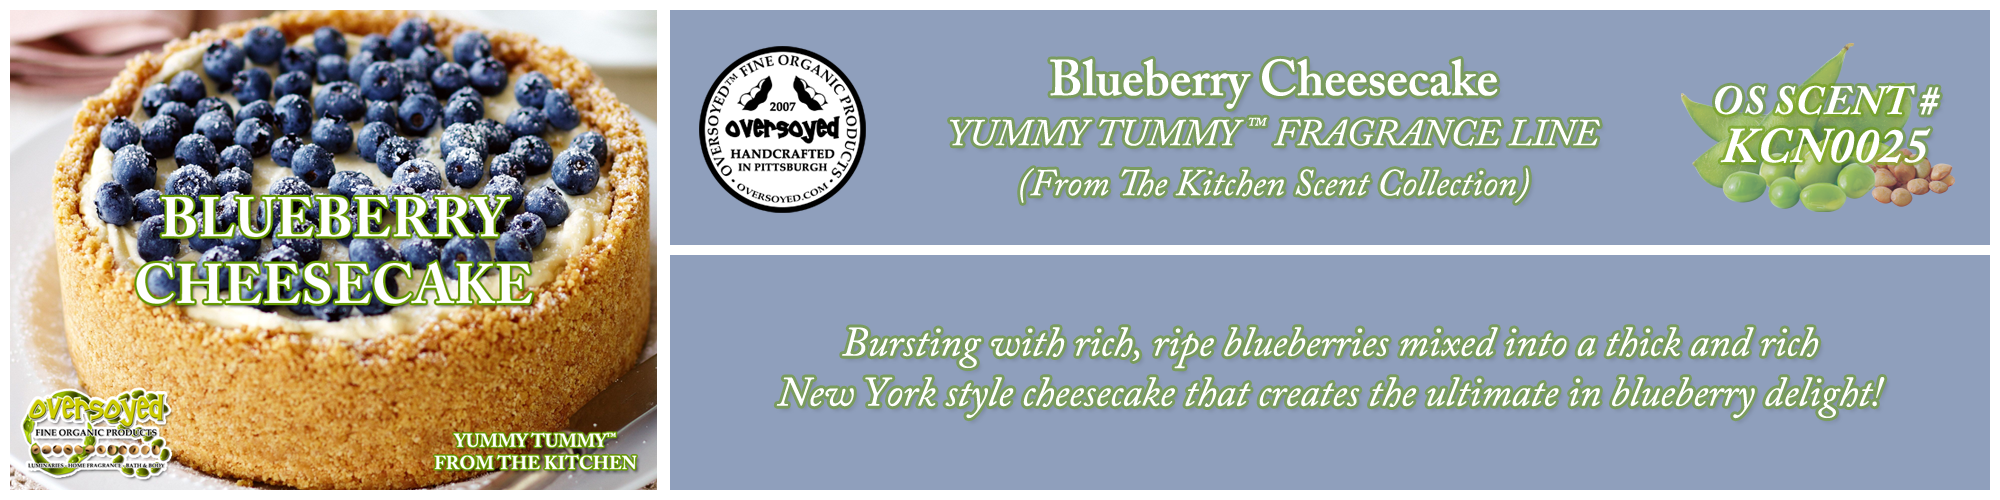 Blueberry Cheesecake Handcrafted Products Collection